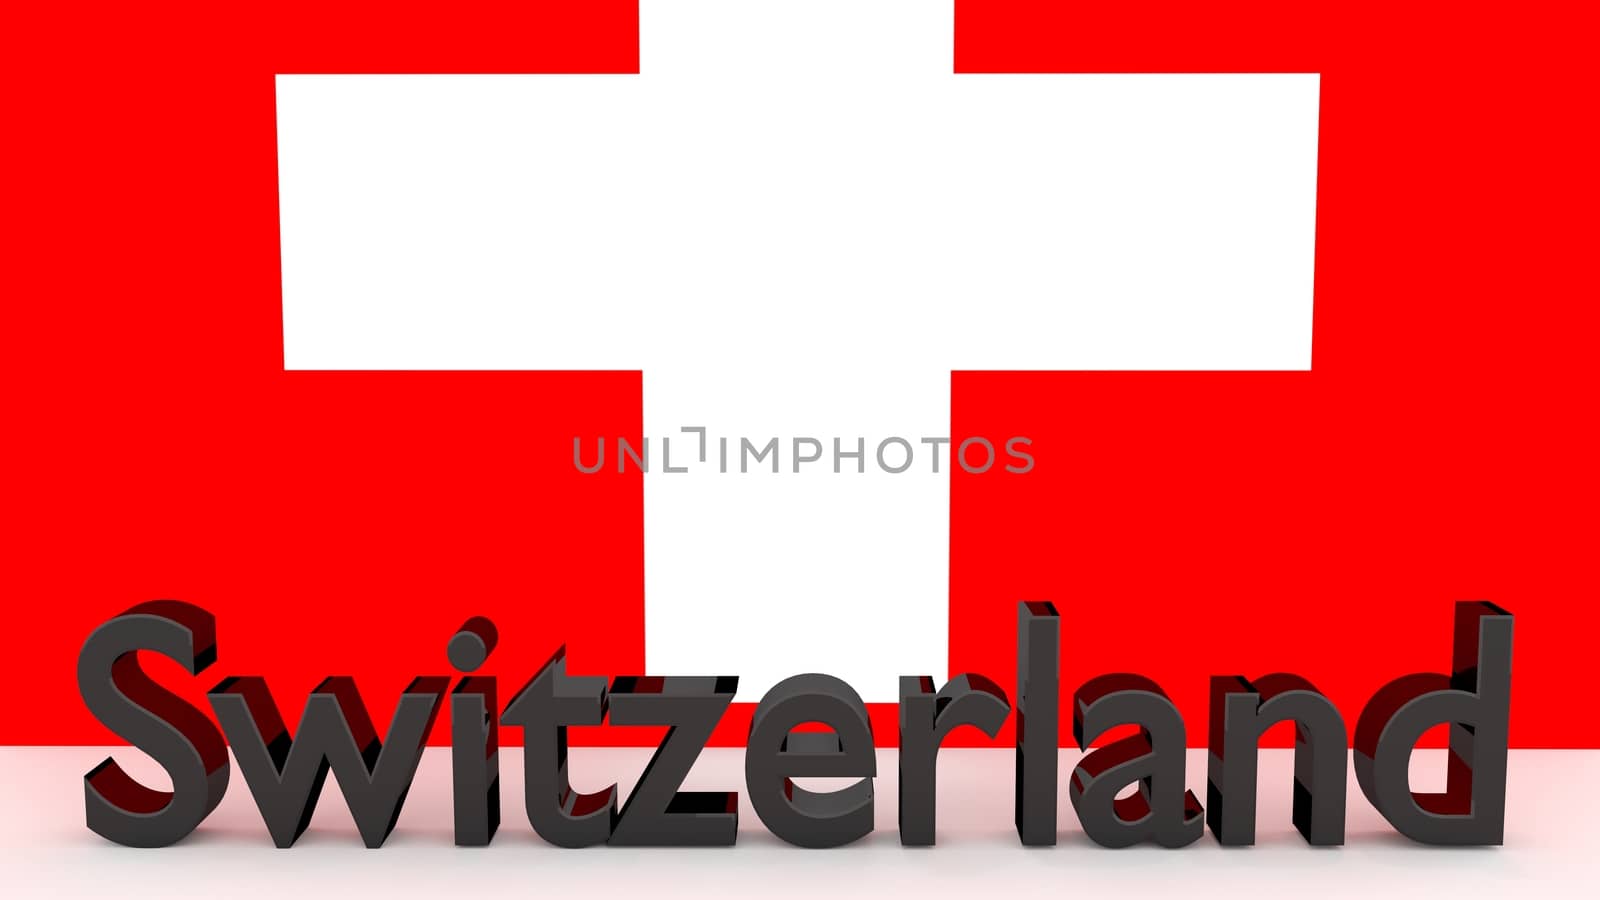 Writing Switzerland made of dark metal  in front of a swiss flag by MarkDw